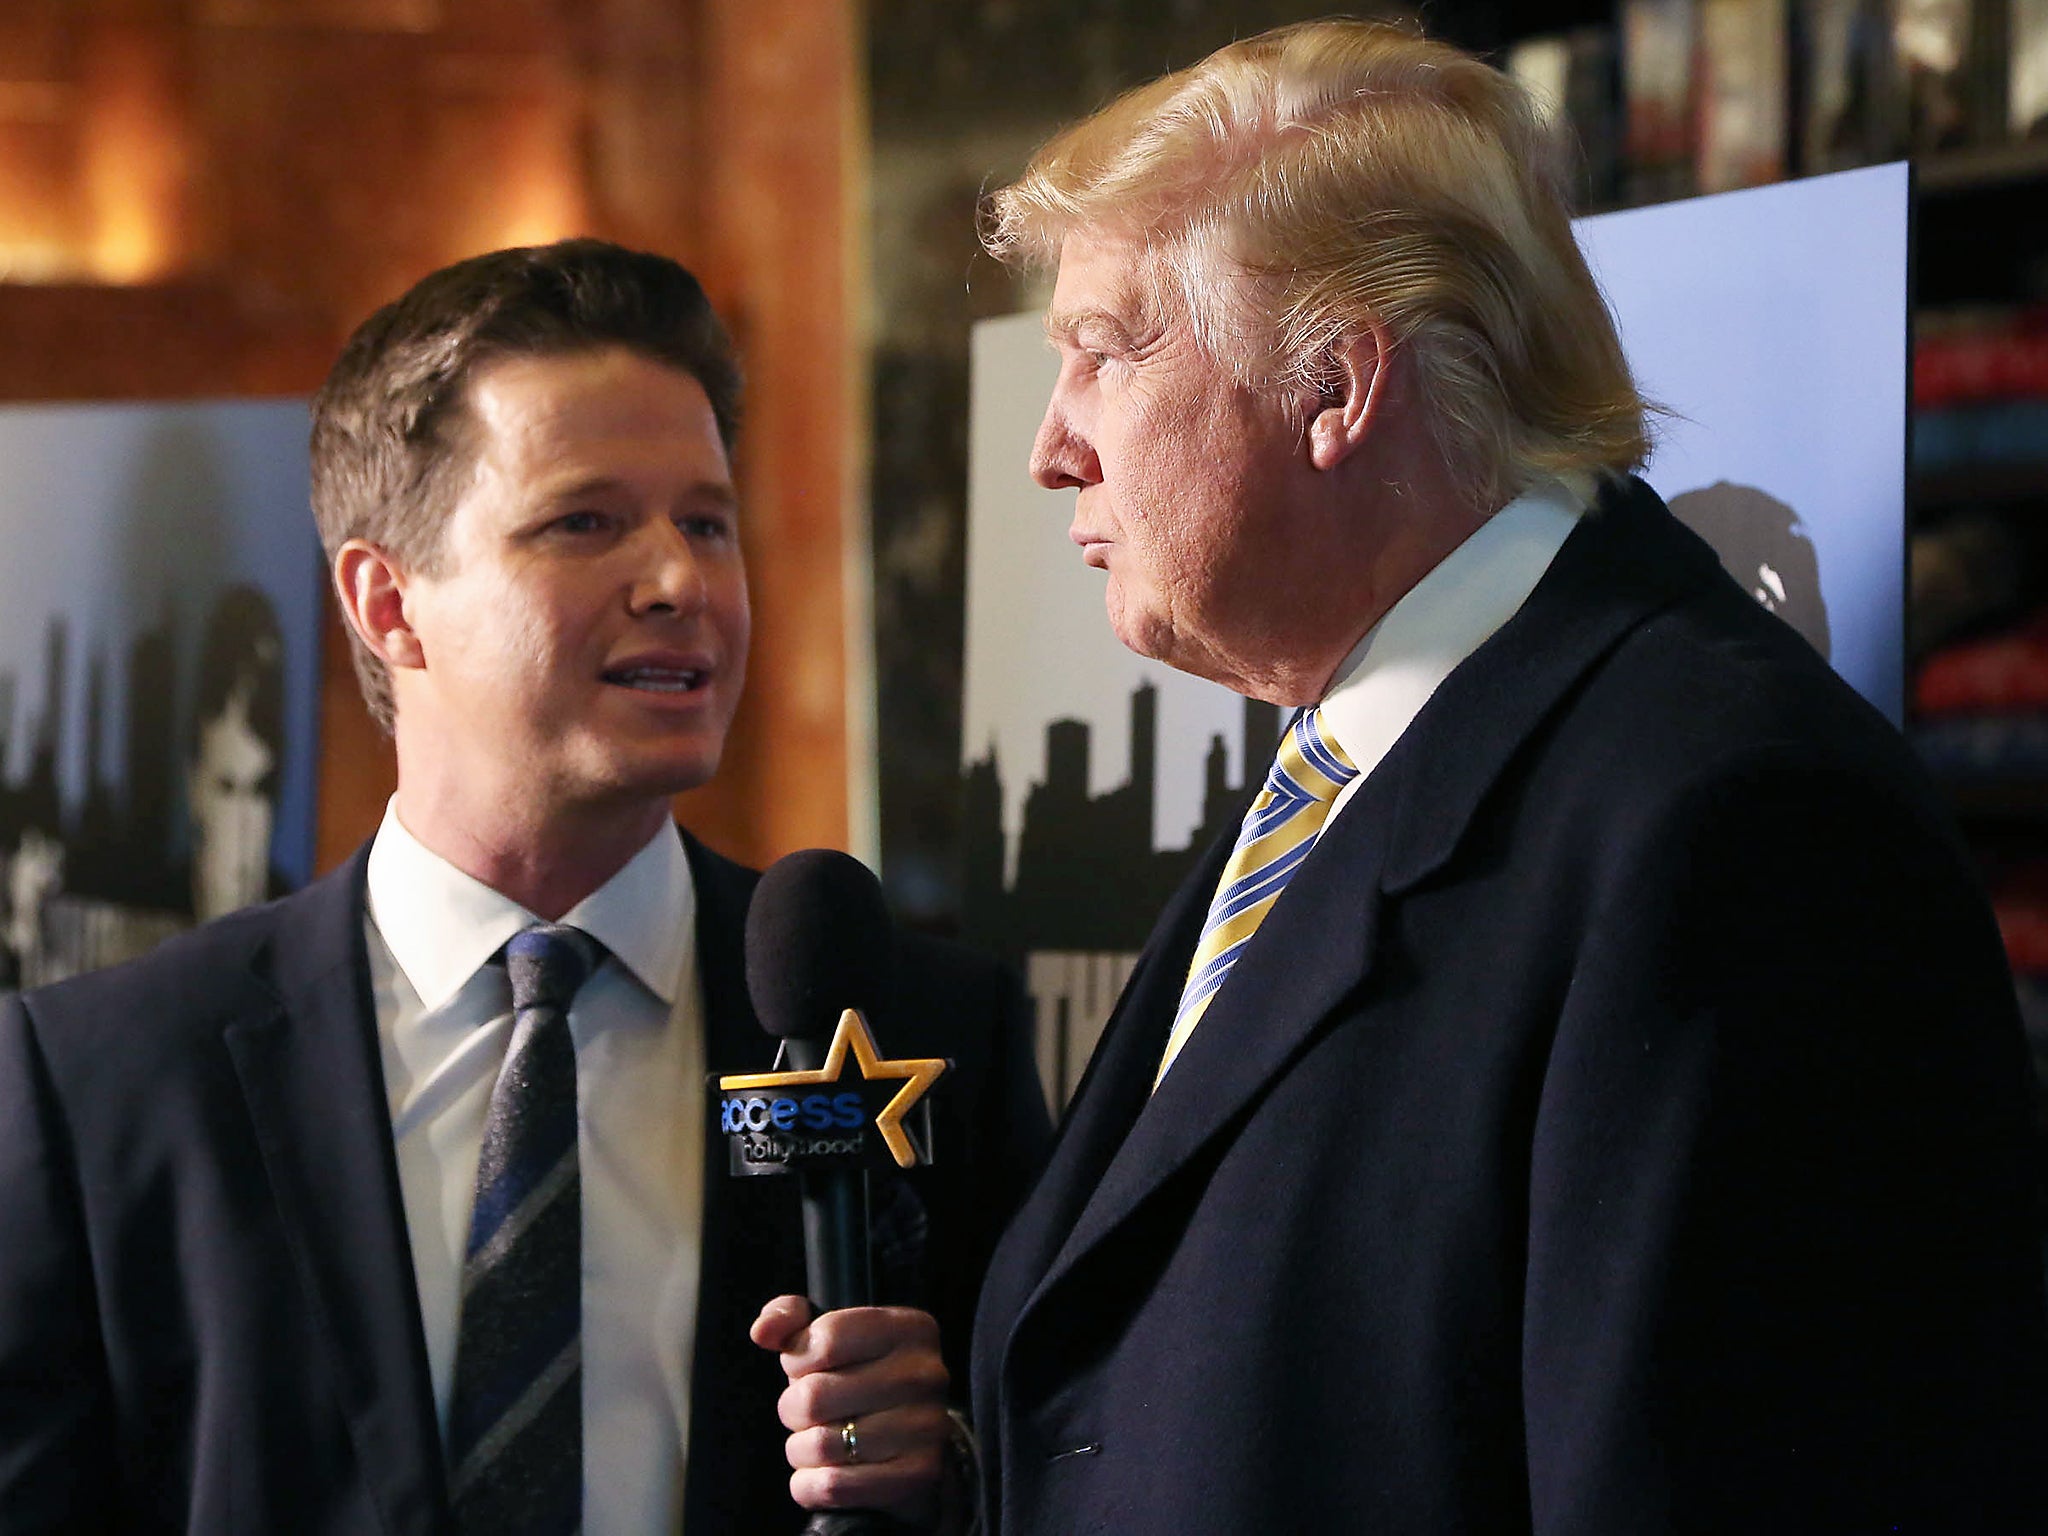 Mr Trump pictured with former 'Access Hollywood' host Billy Bush